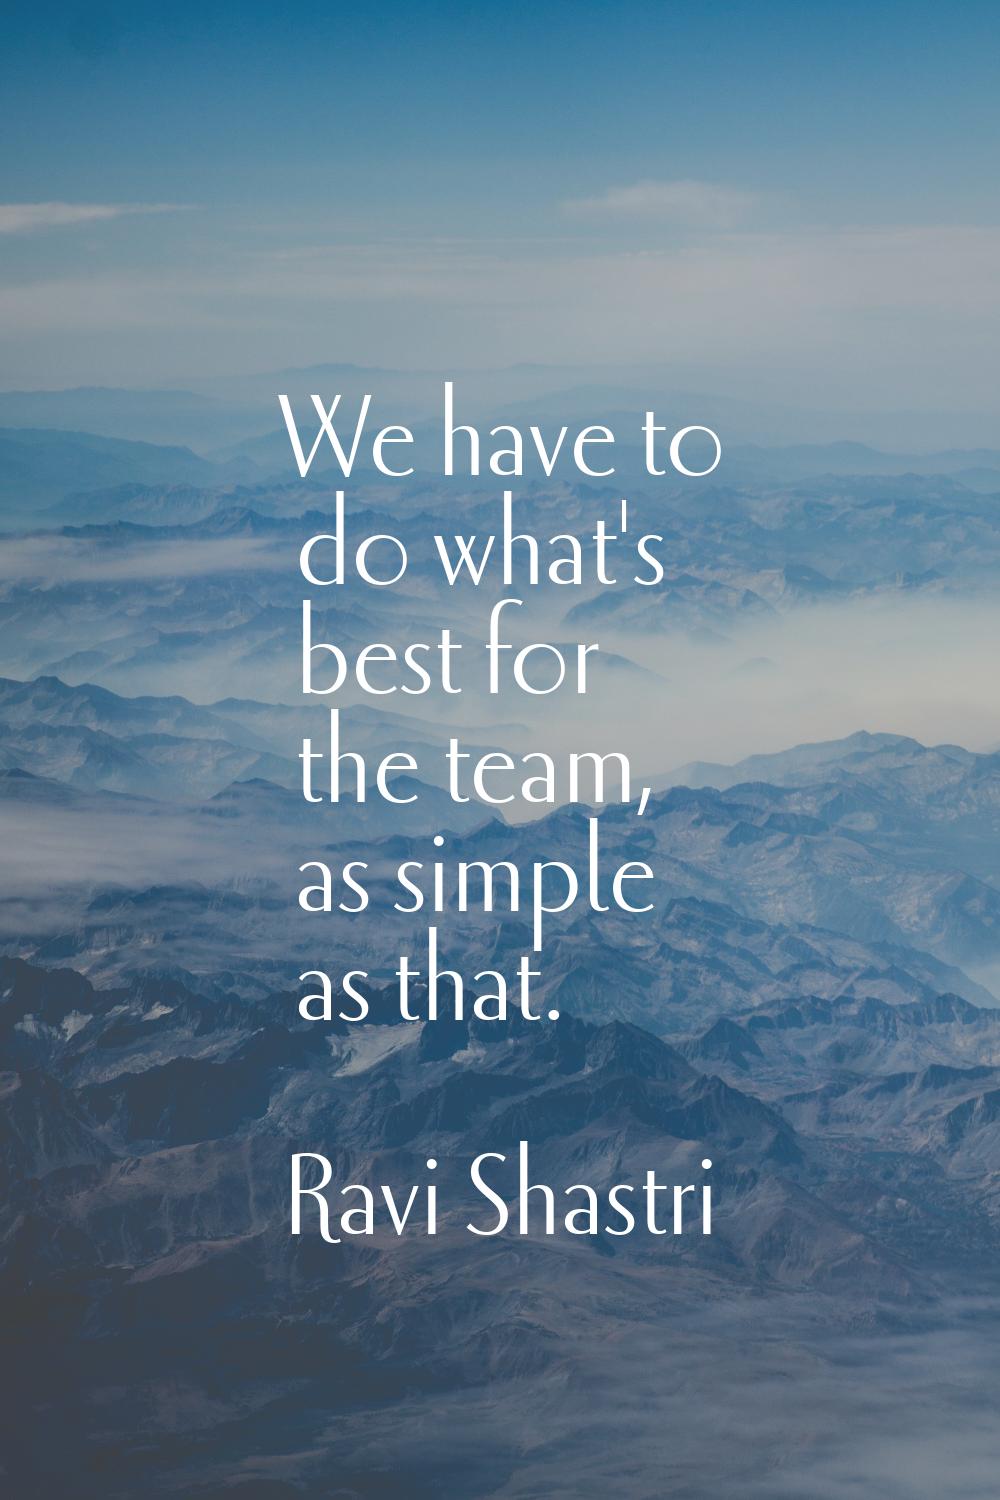 We have to do what's best for the team, as simple as that.